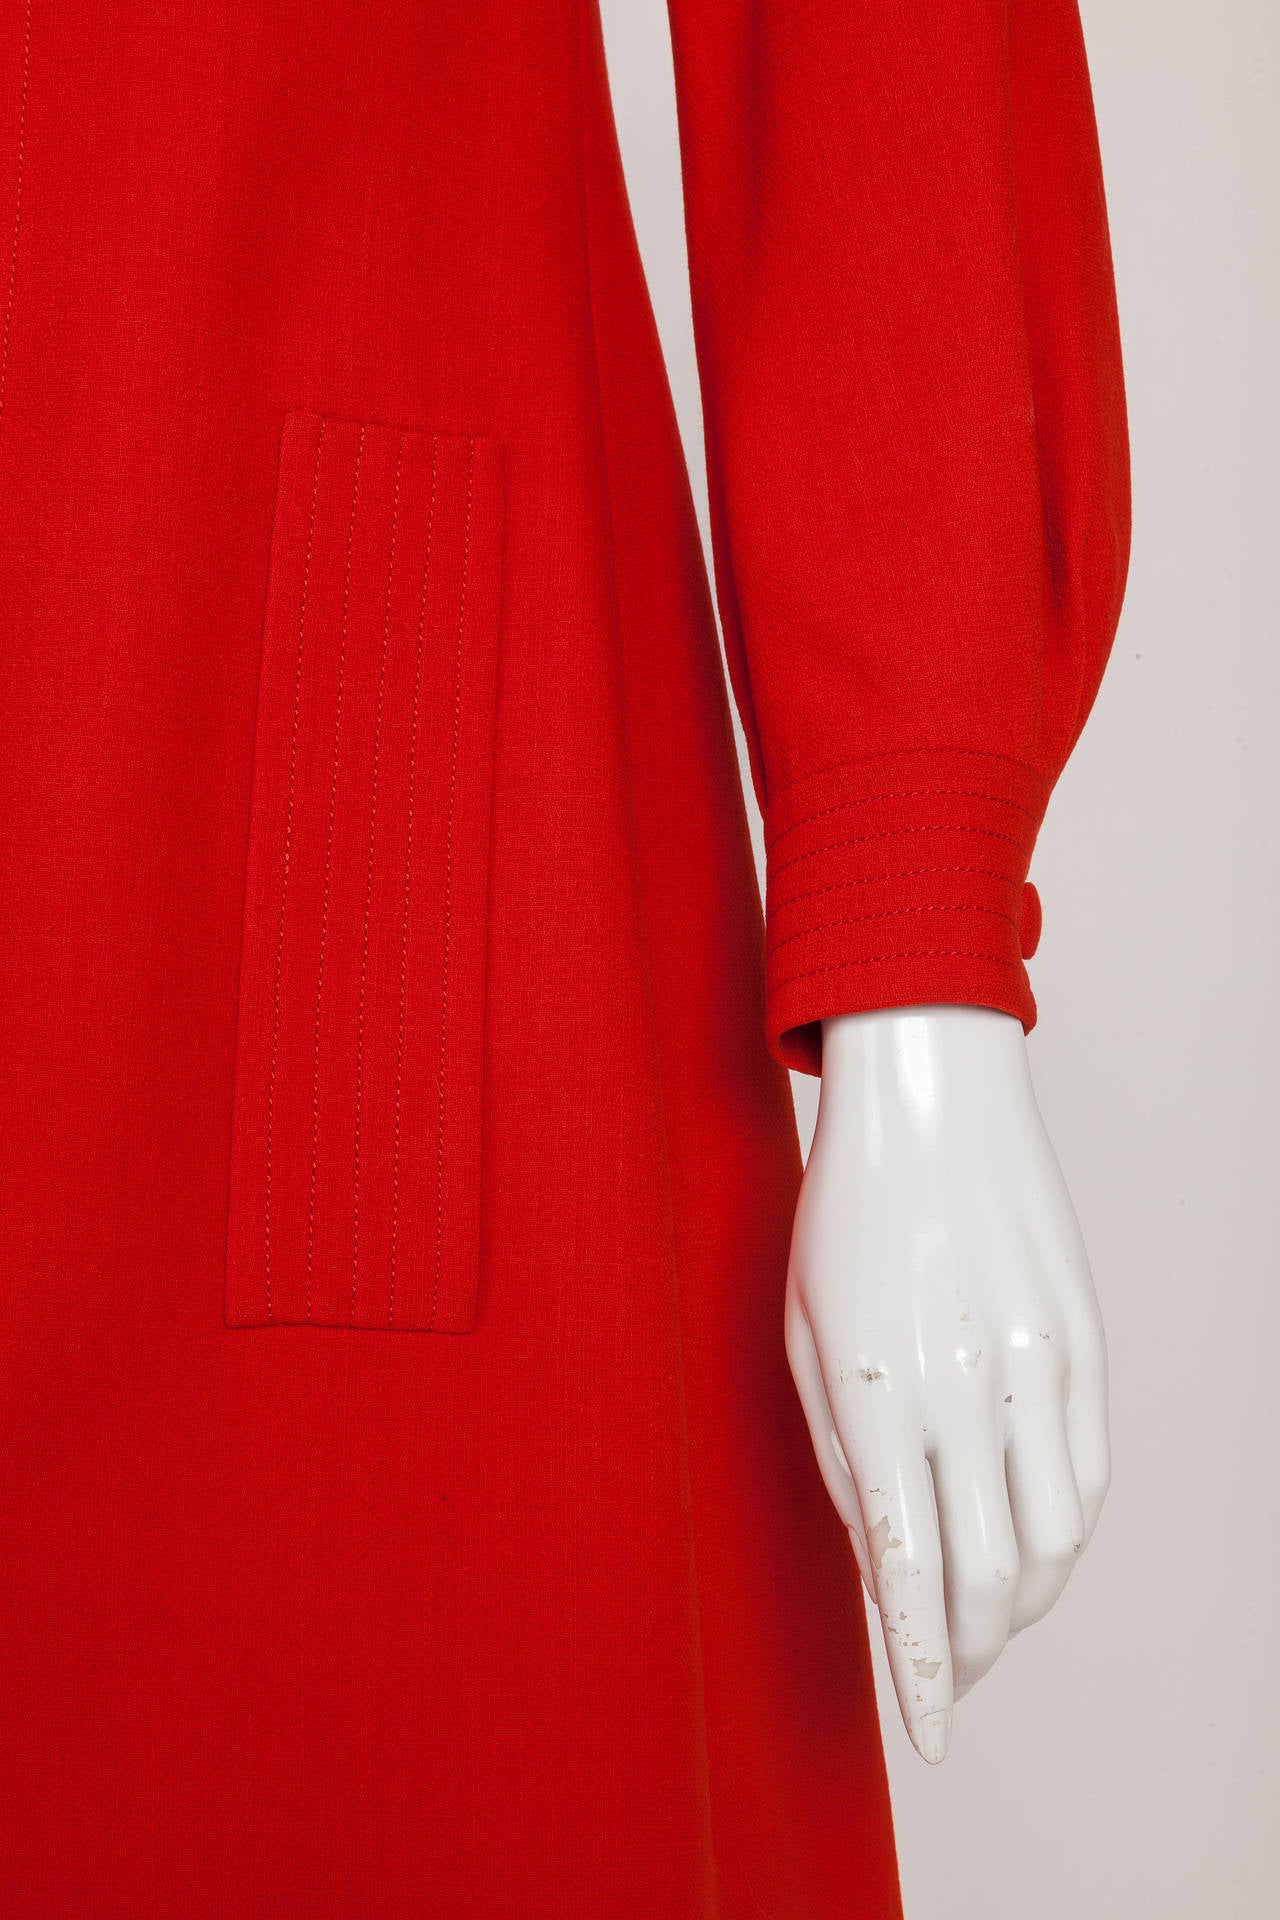 Pierre Cardin Red Wool Dress w/Channel Stitched Design Motif ca. 1970 For Sale 1